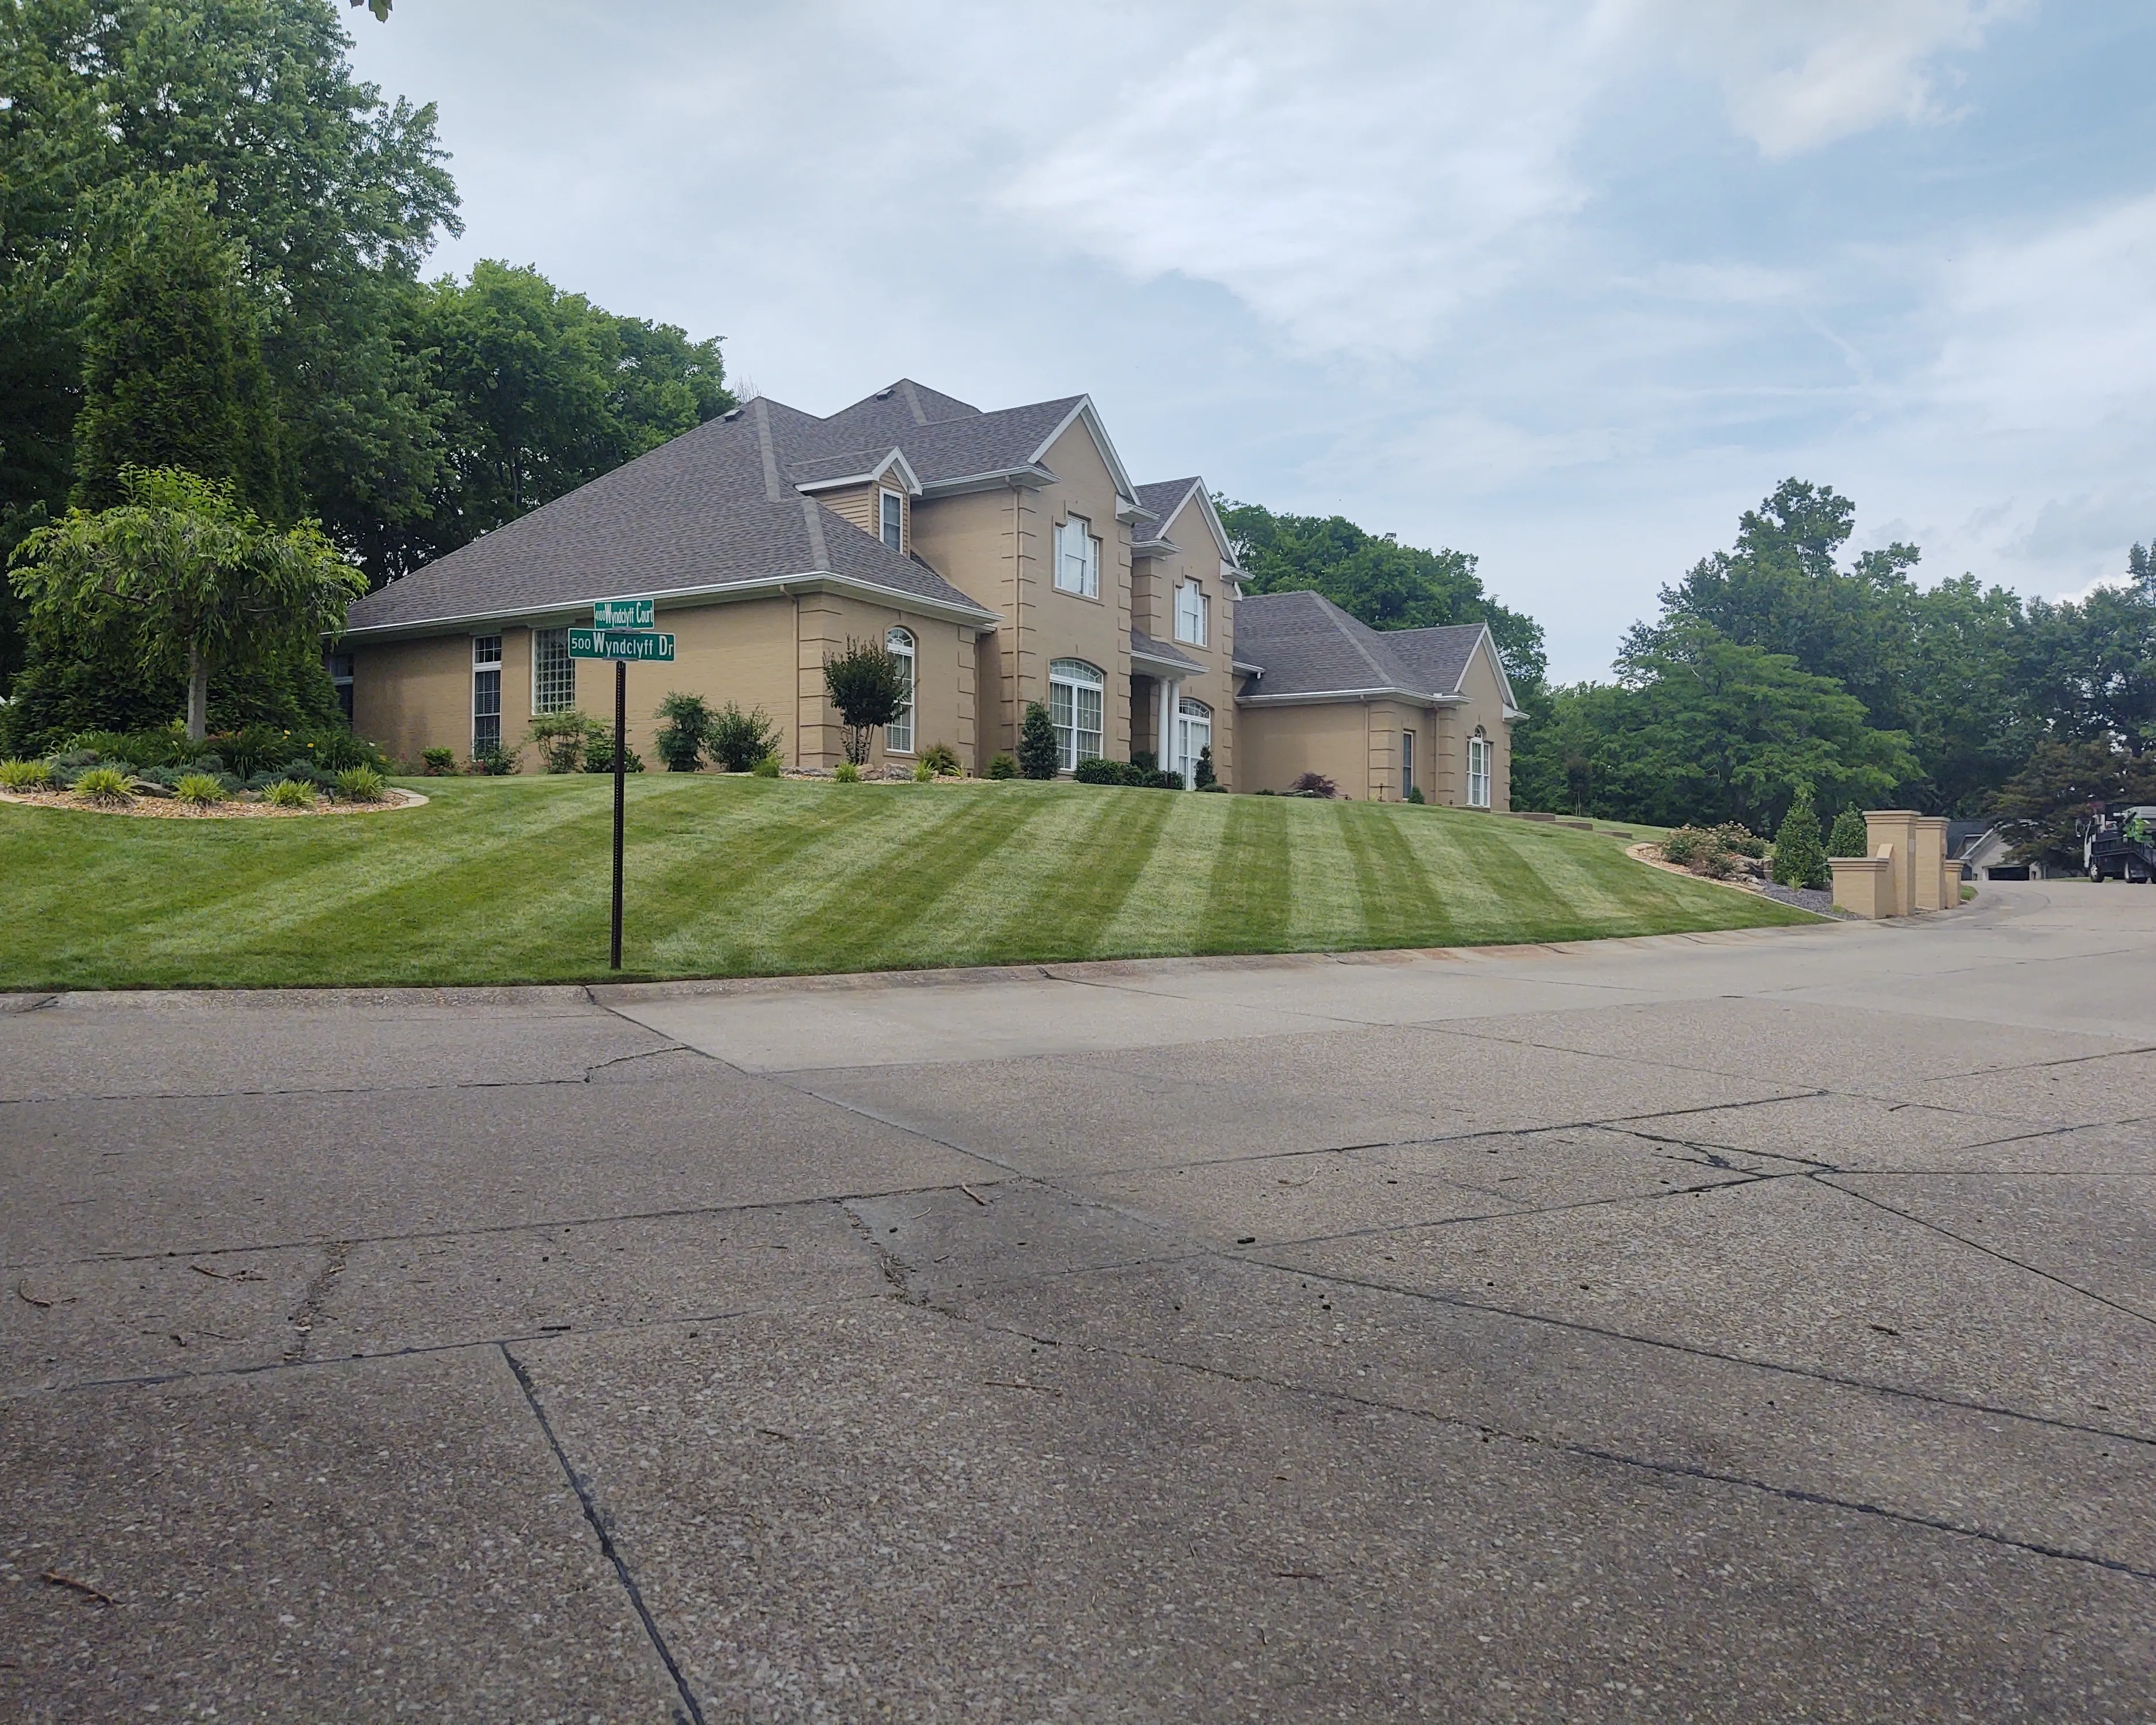 Lawn Care for The Grass Guys Complete Lawn Care LLC. in Evansville, IN